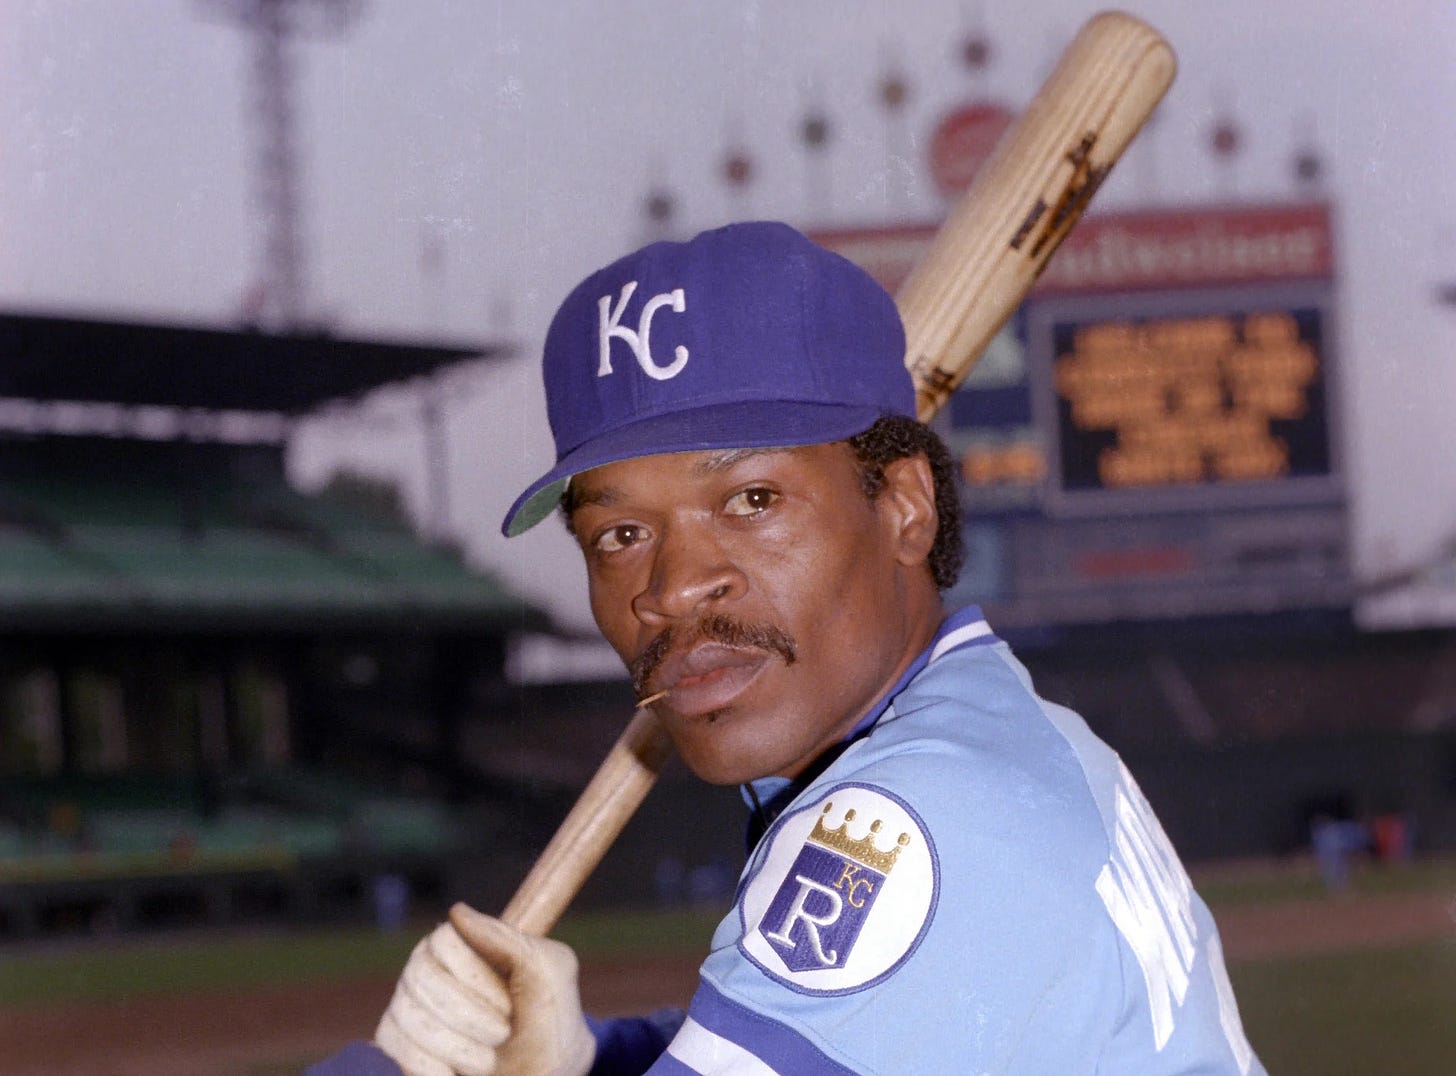 Former Kansas City Royals infielder U.L. Washington, seen here in 1982, died Sunday. He was 70. (Ron Vesely/Getty Images)